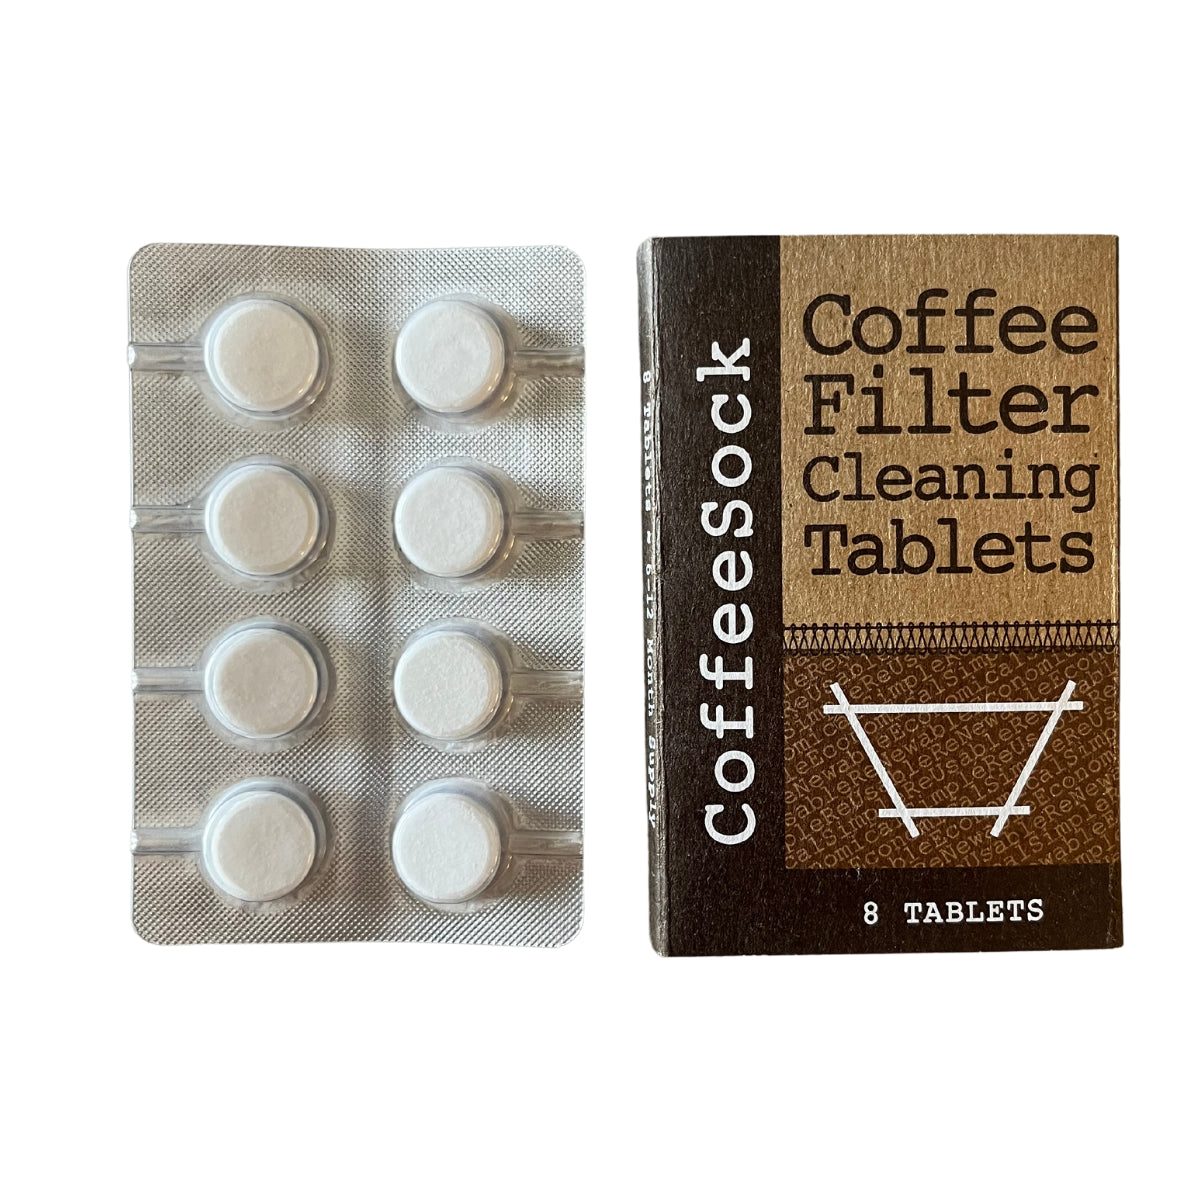 CoffeeSock Coffee Filter Cleaning Tablets - CoffeeSock - Bluecashew Kitchen Homestead